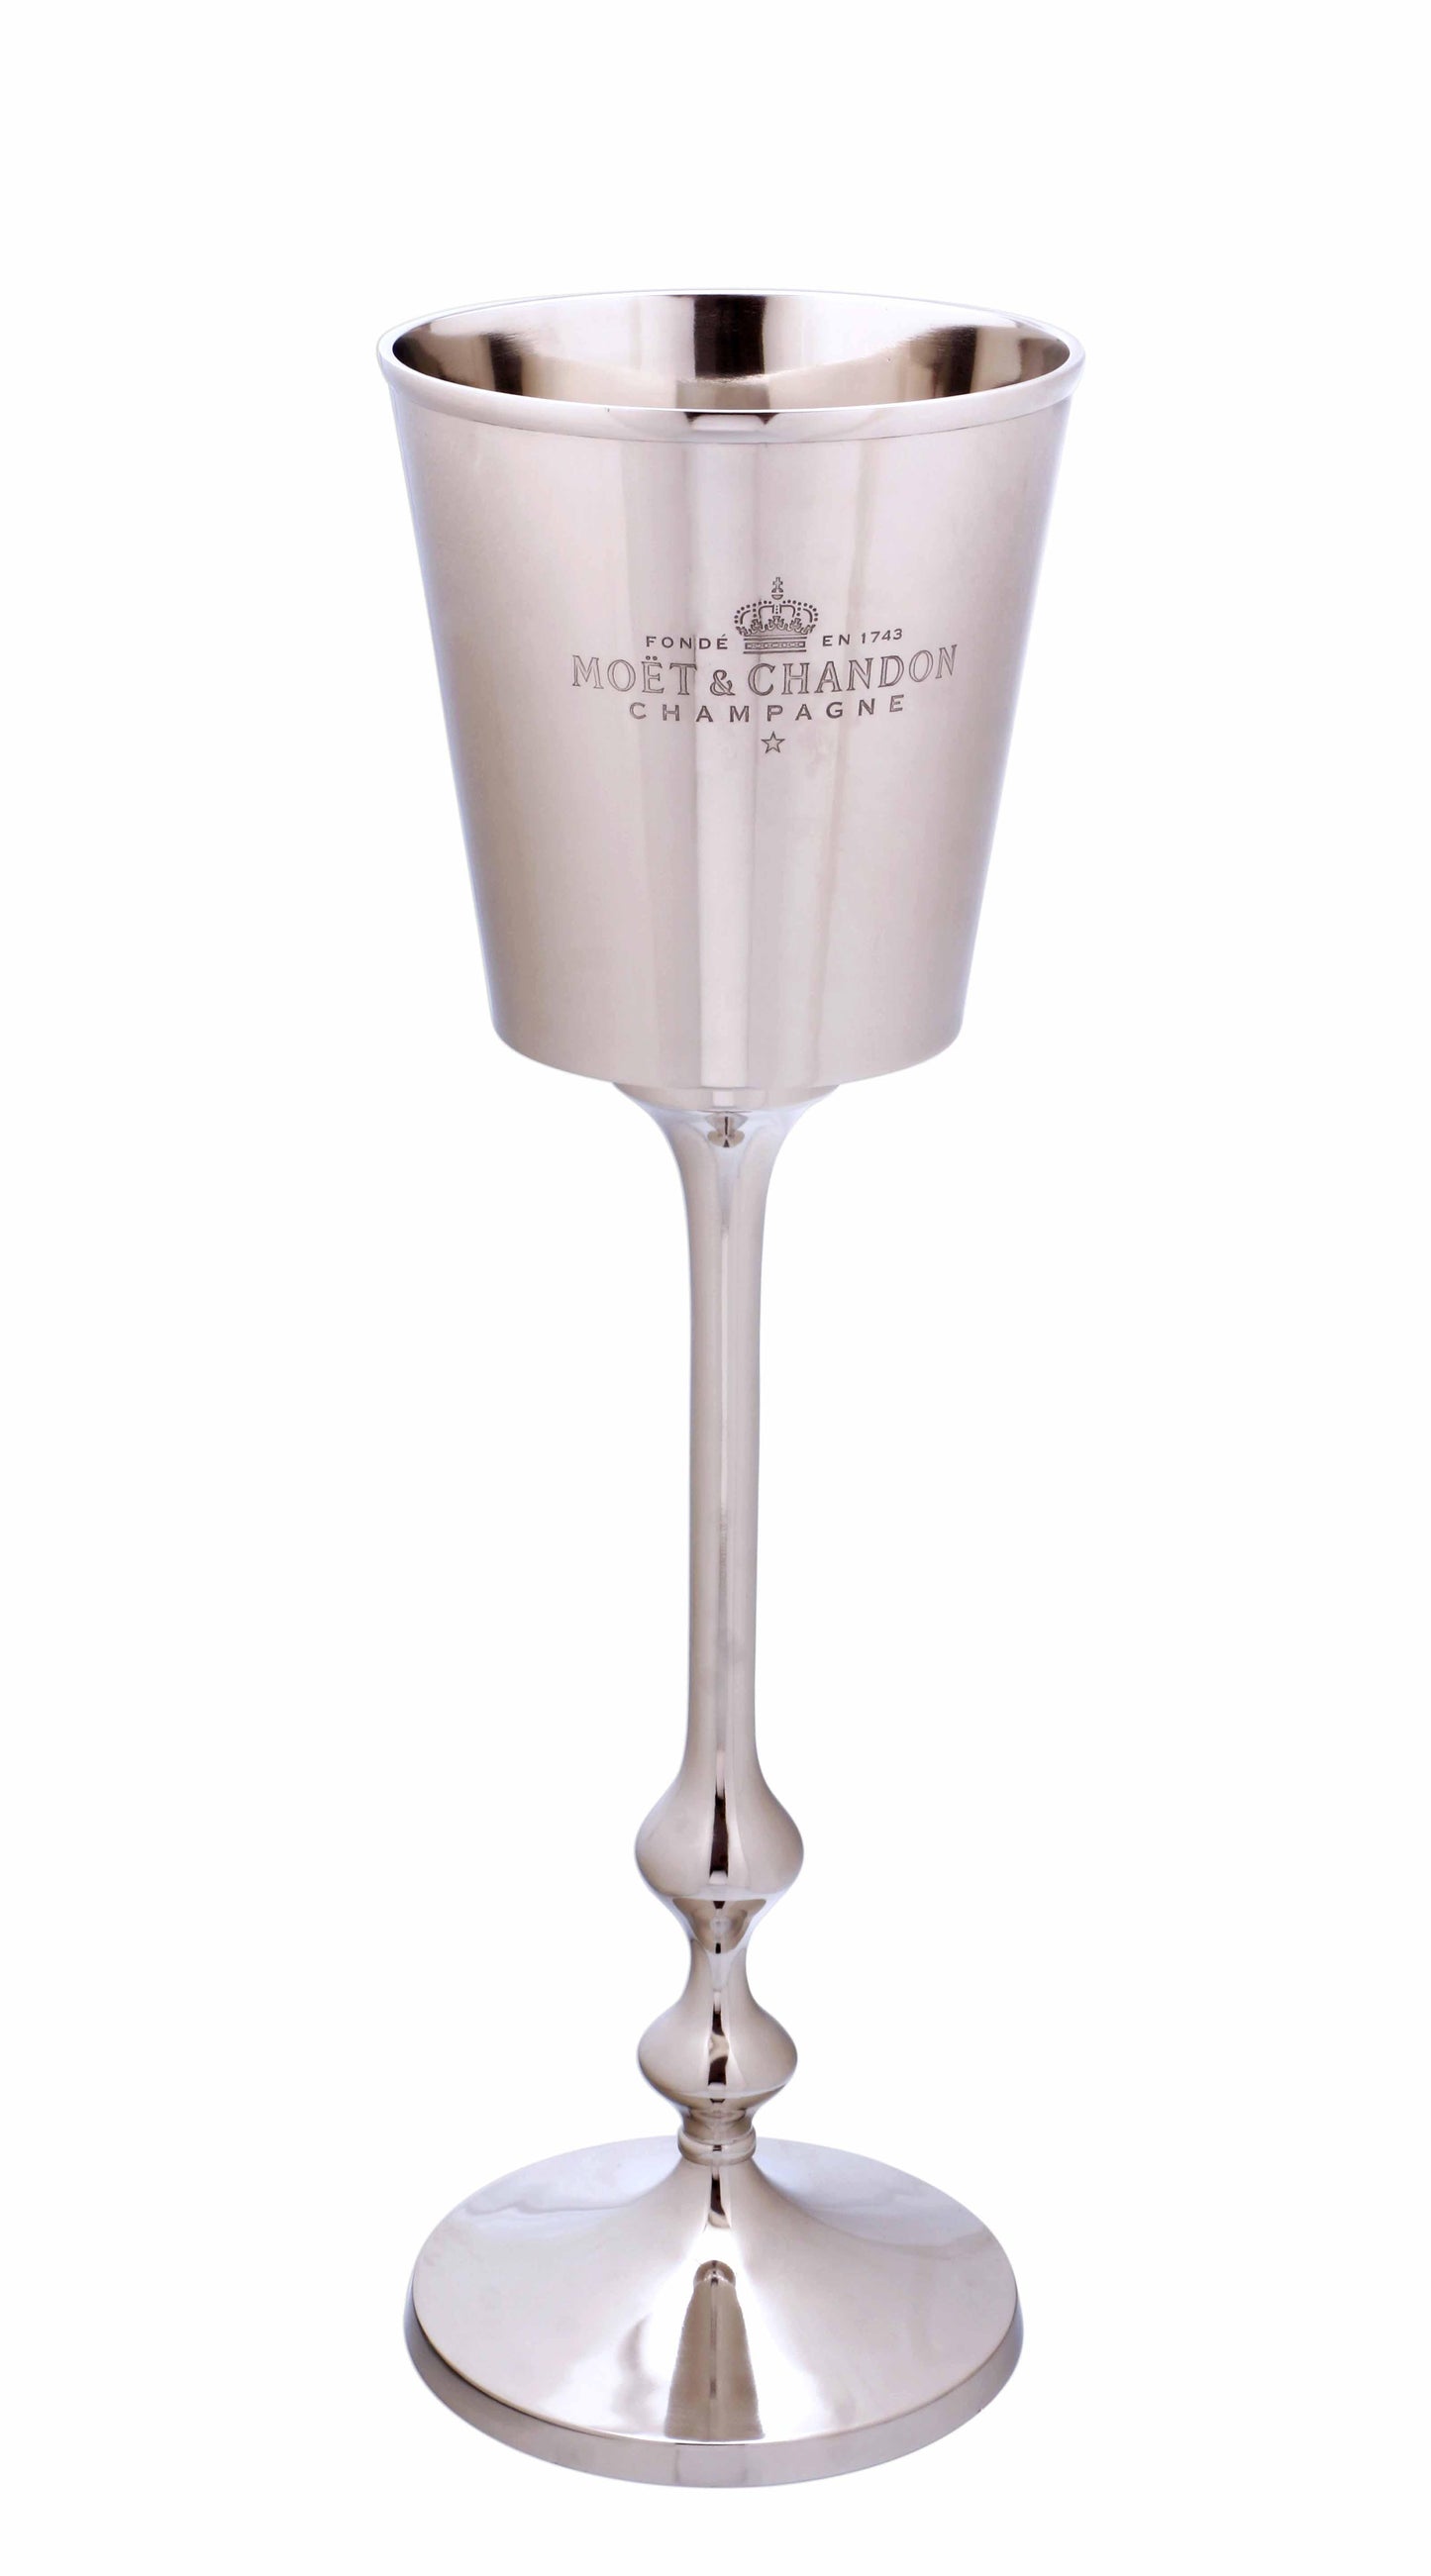 Champagne Standing Bucket - Moet & Chandon for sale - Woodcock and Cavendish